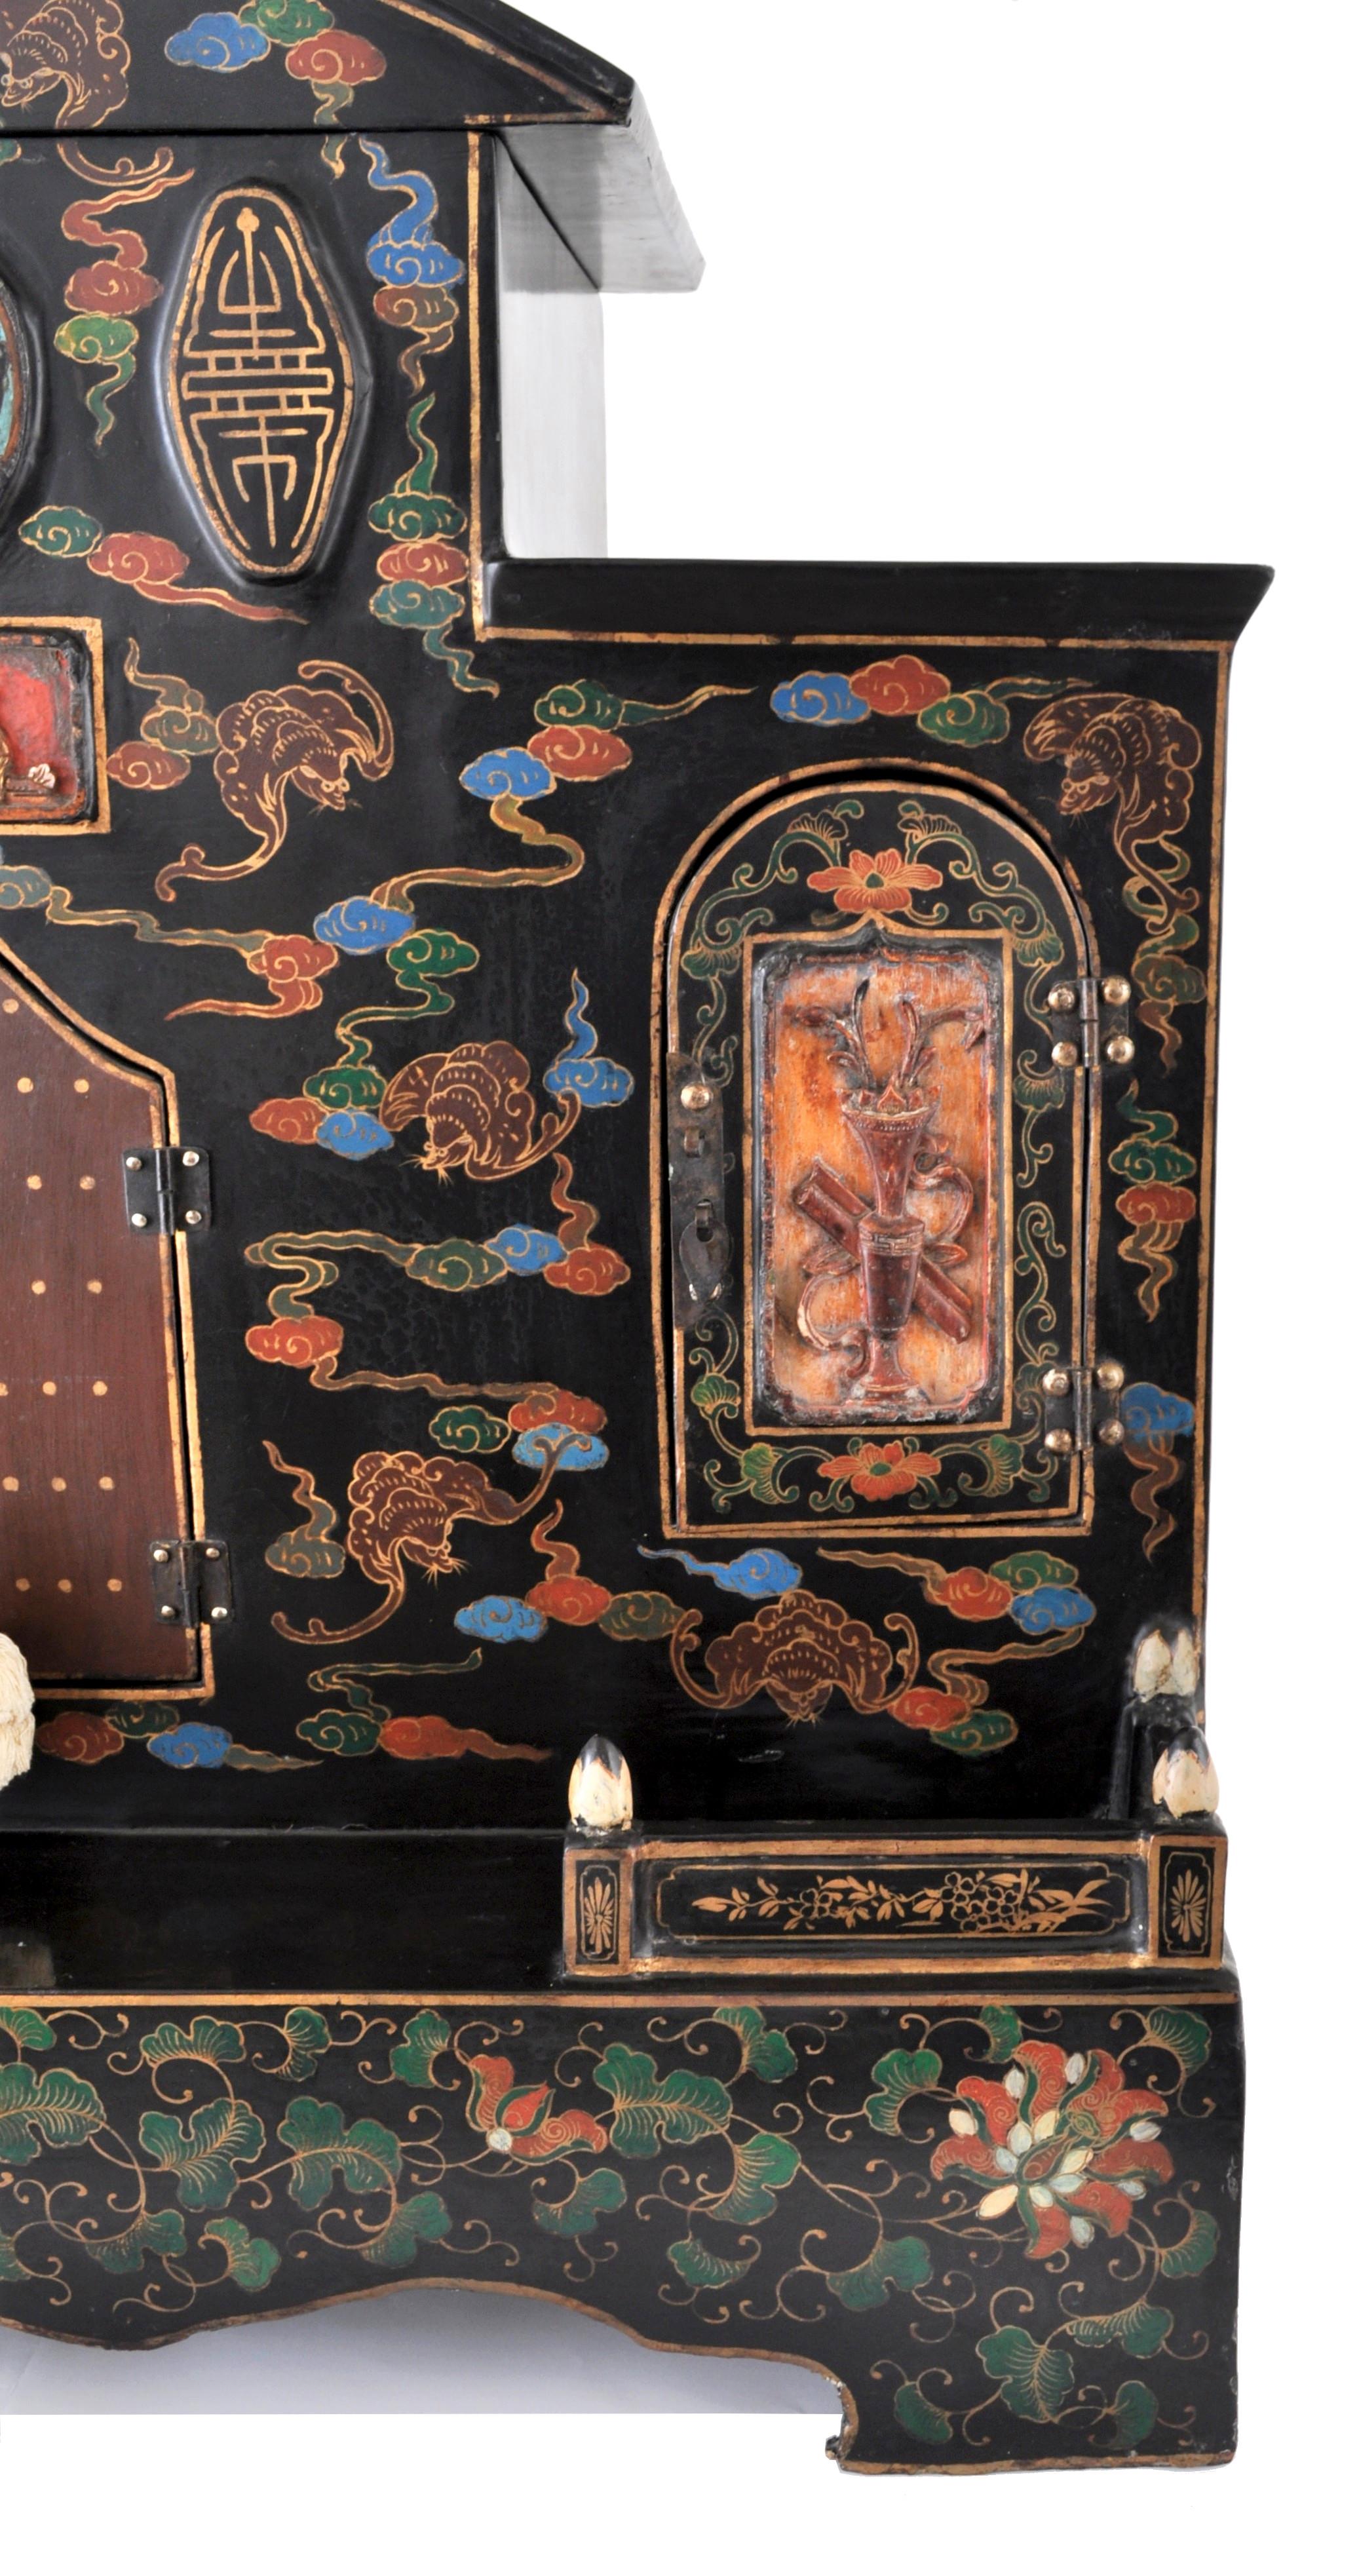 Antique Chinese Qing Dynasty Lacquer Cloisonne Buddhistic Shrine/Cabinet 4